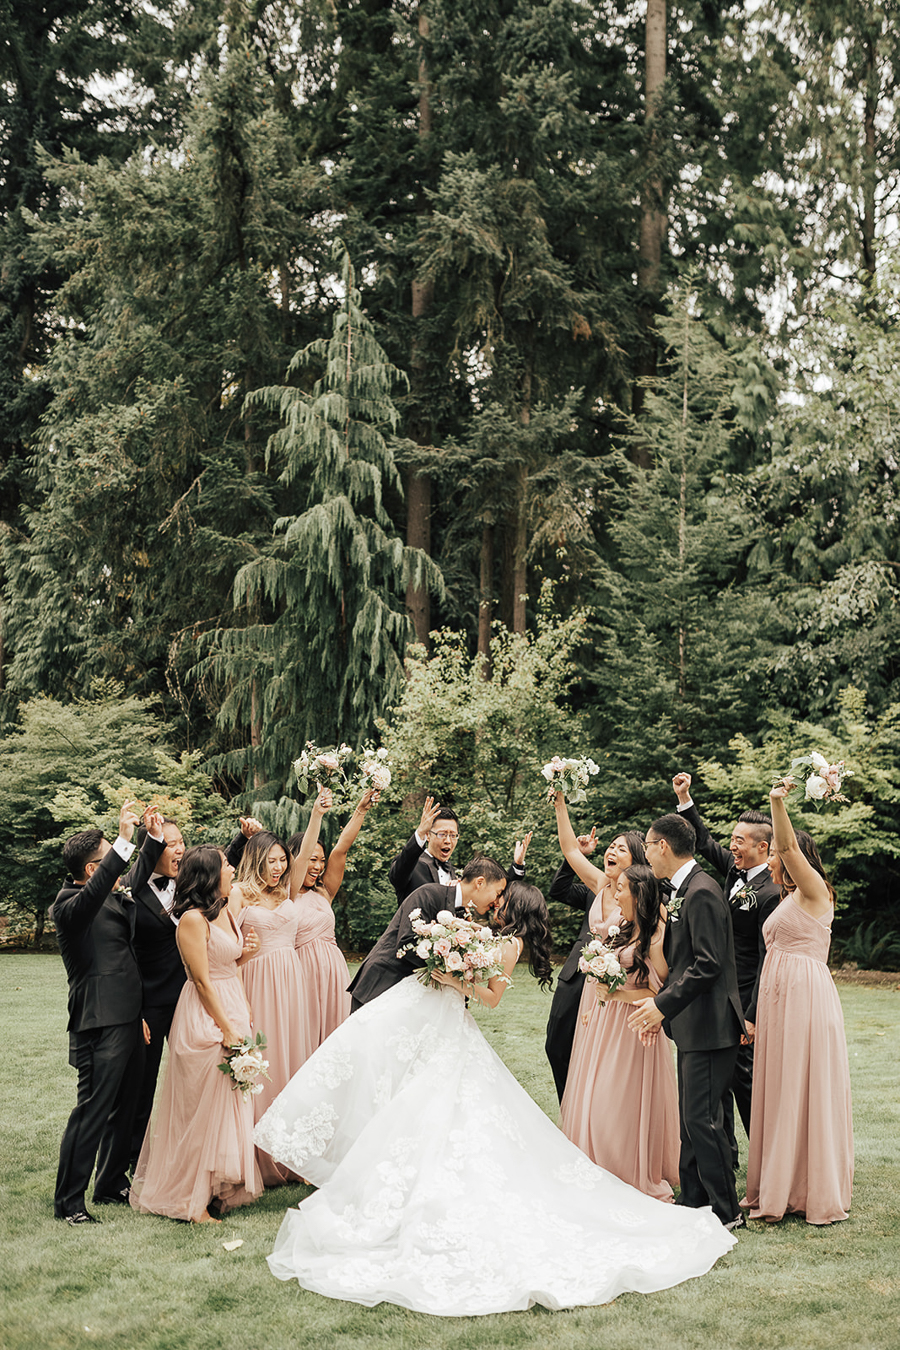 My Approach To Wedding Party Photos | Courtney Carney Photo